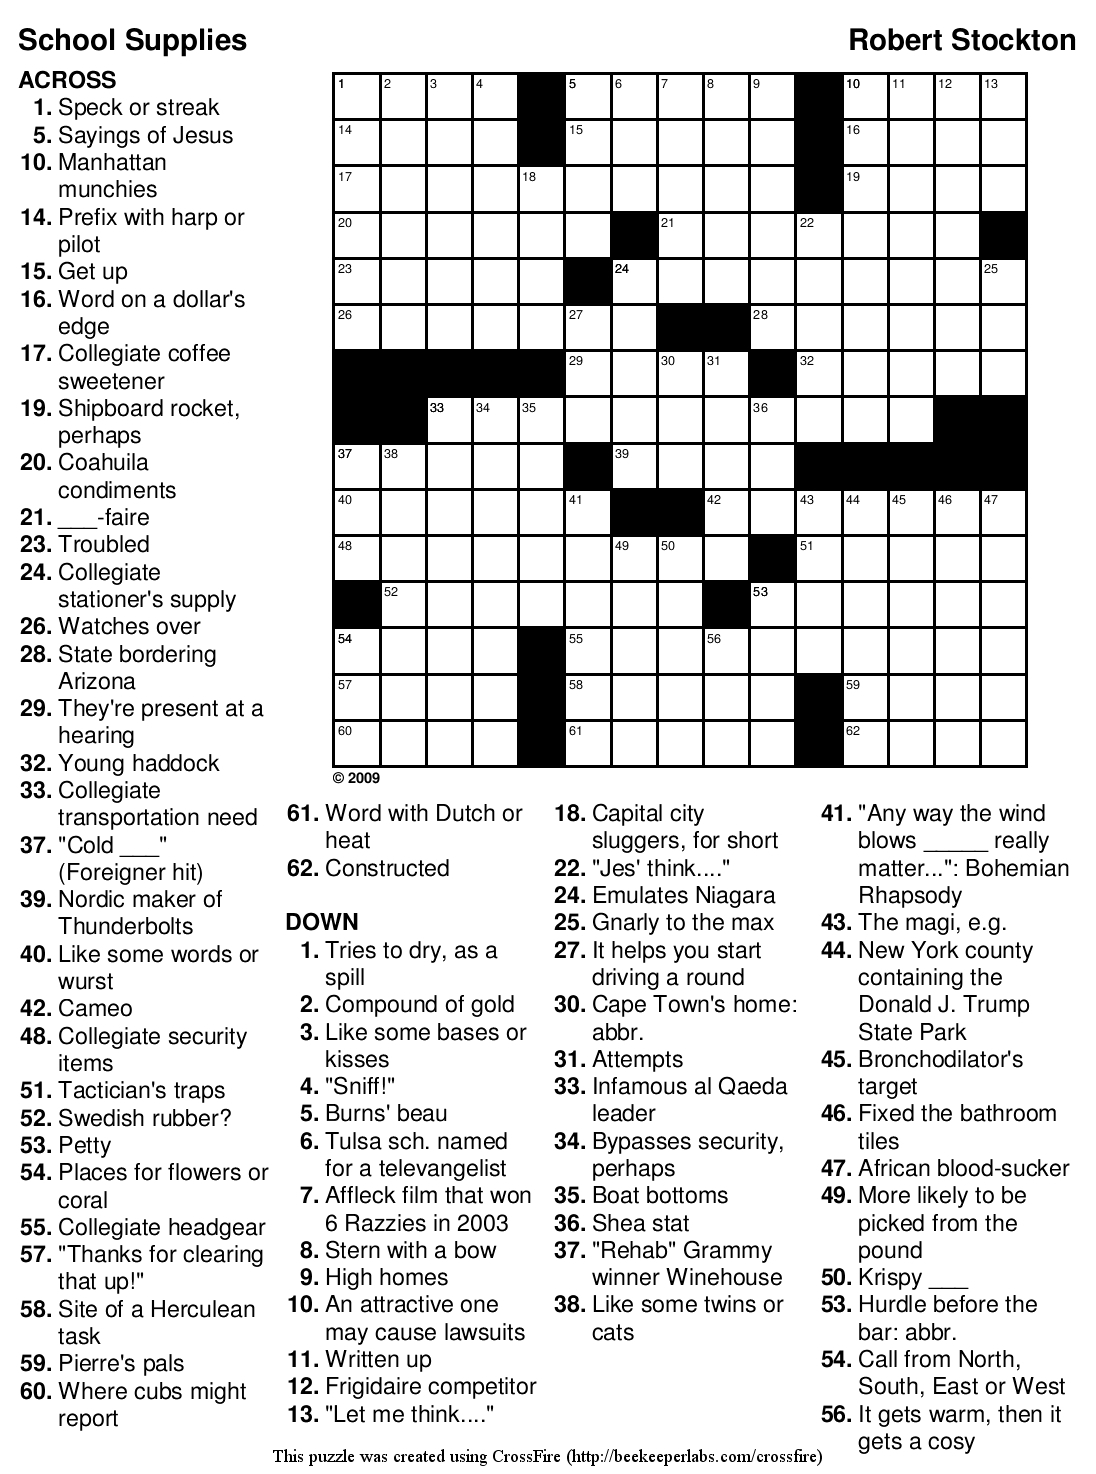 Free Daily Online Printable Crossword Puzzles | Free Printables - Printable Crossword Puzzles For High School English